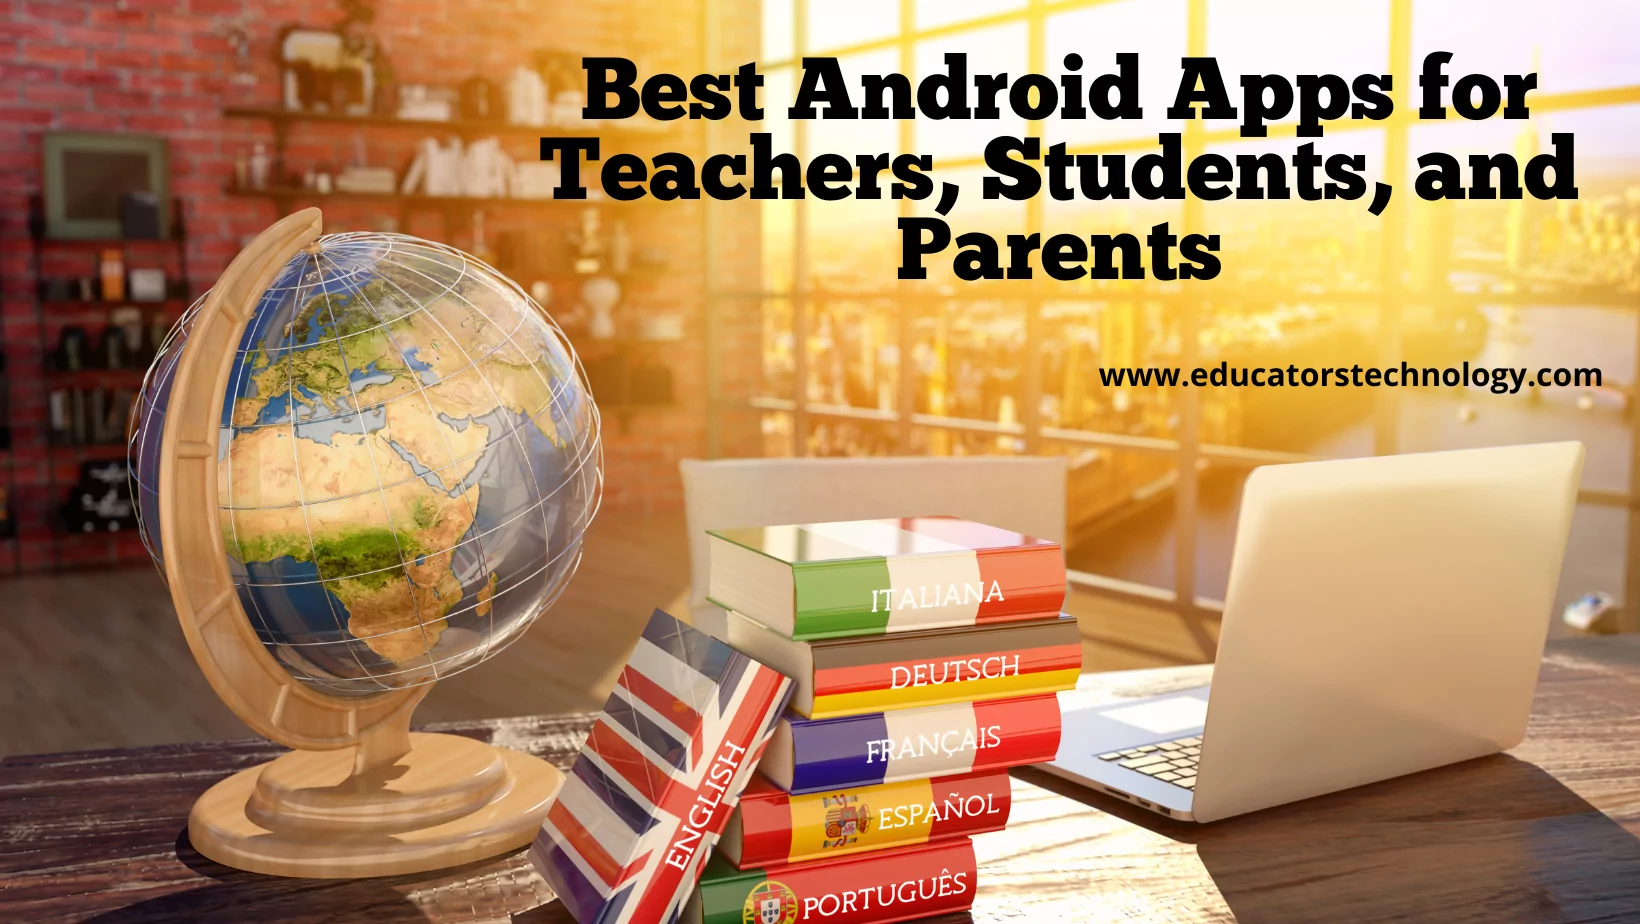 Android apps for teachers